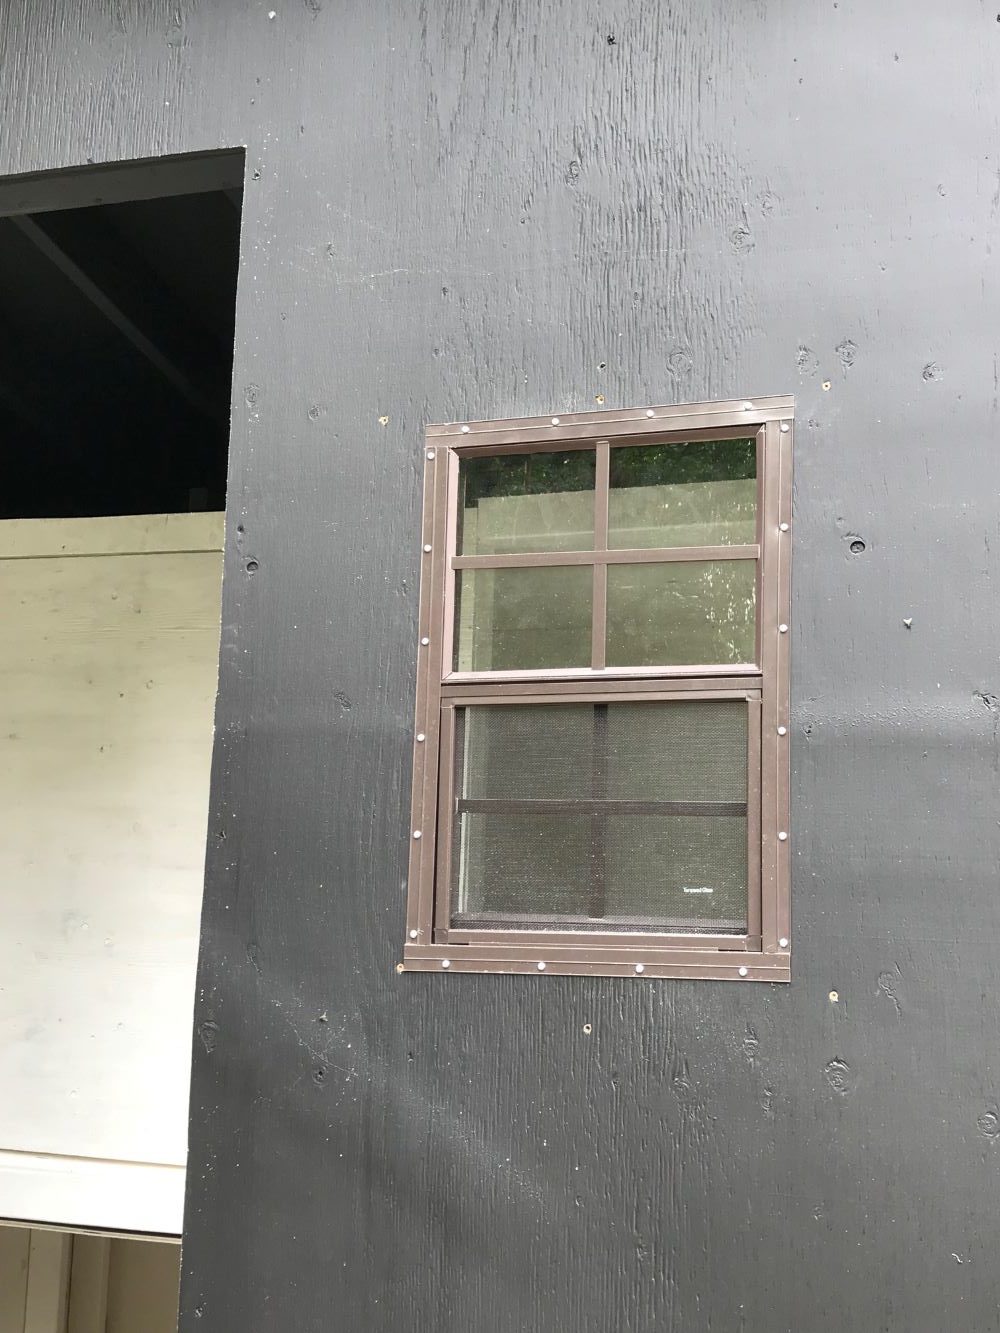 Add a Shed Window to Chicken Coop